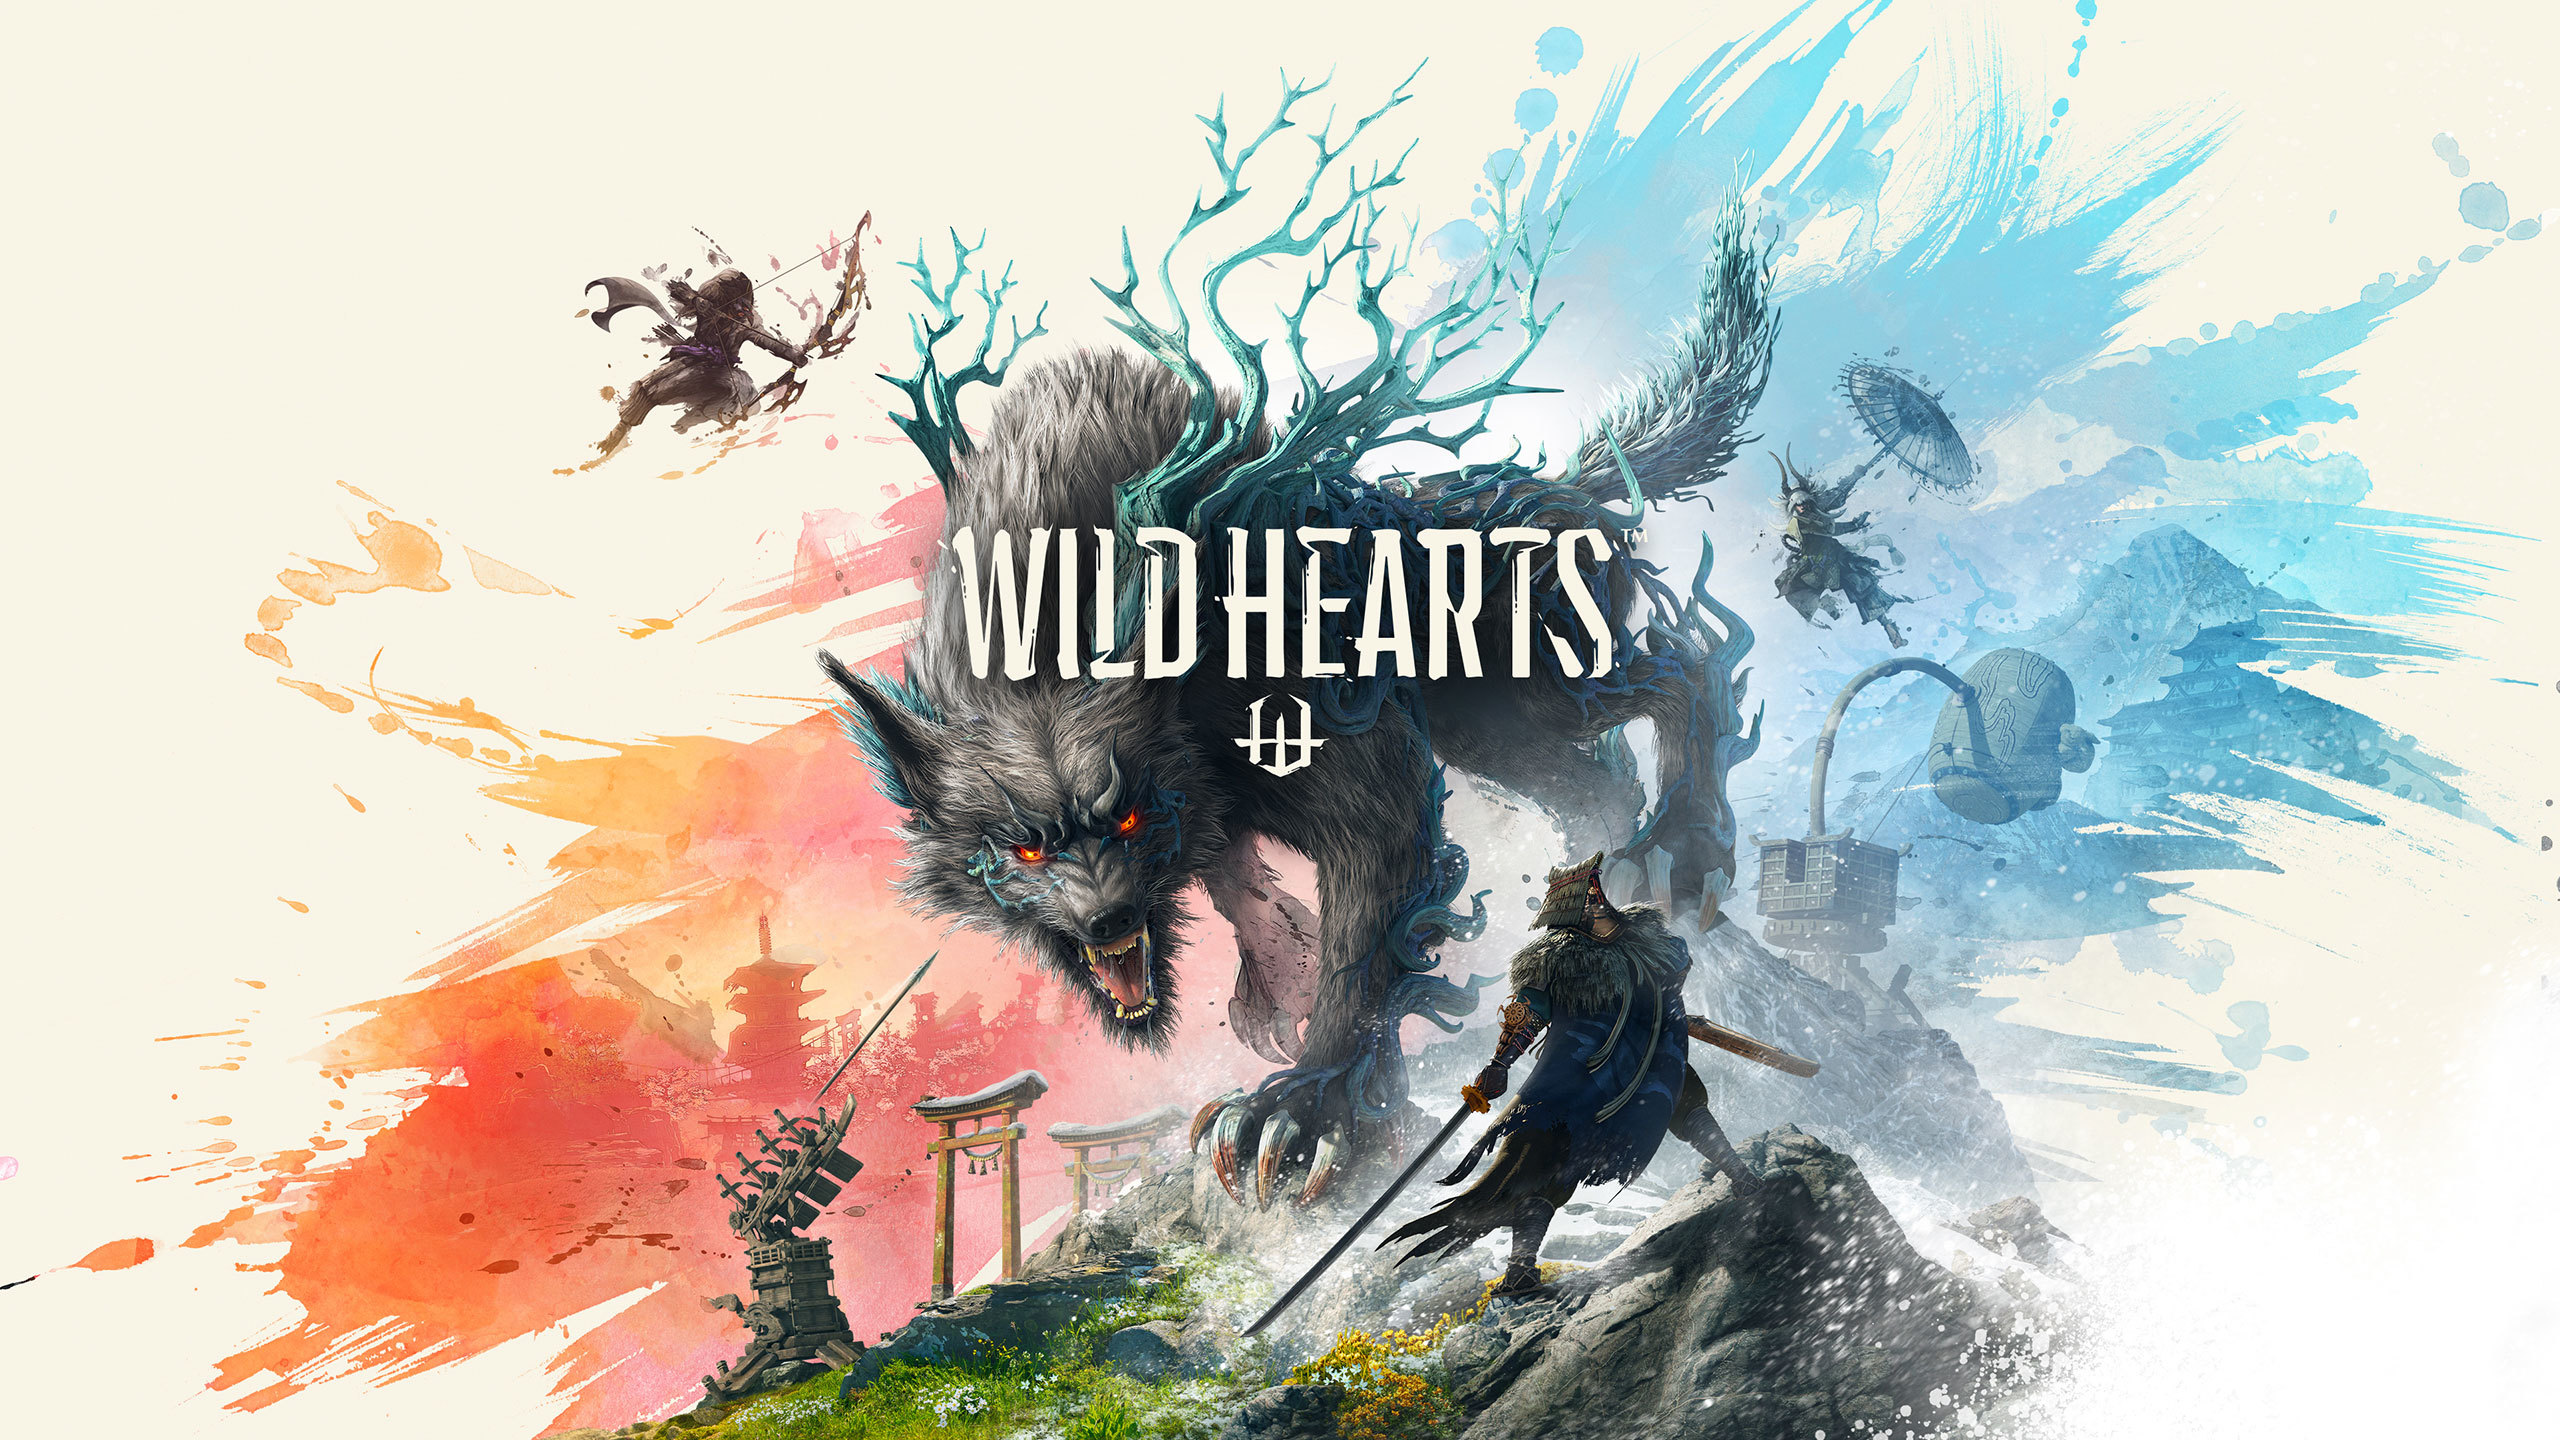 Wild Hearts gameplay shows off different weapons and playstyles in